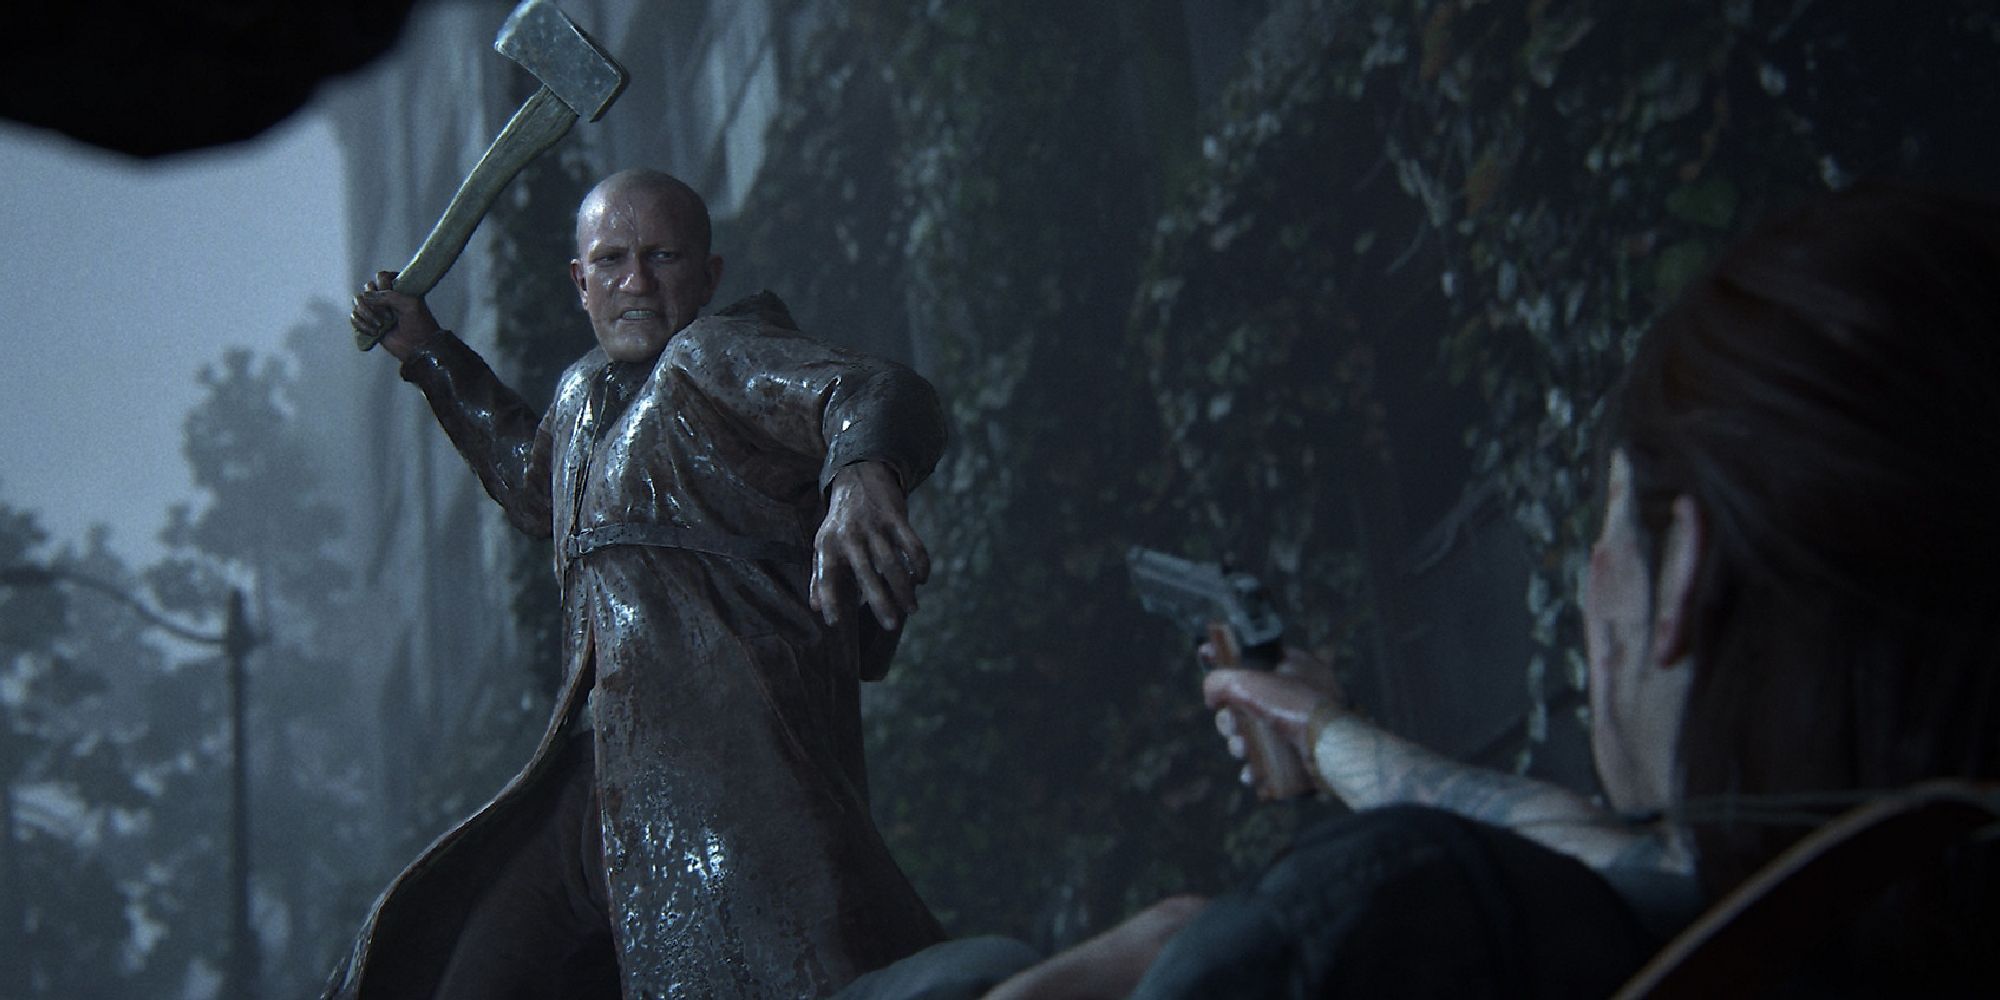 Man With An Axe Preparing To Attack Ellie As She Is Pinned To The Ground While Pointing A Gun At Him In The Last Of Us 2